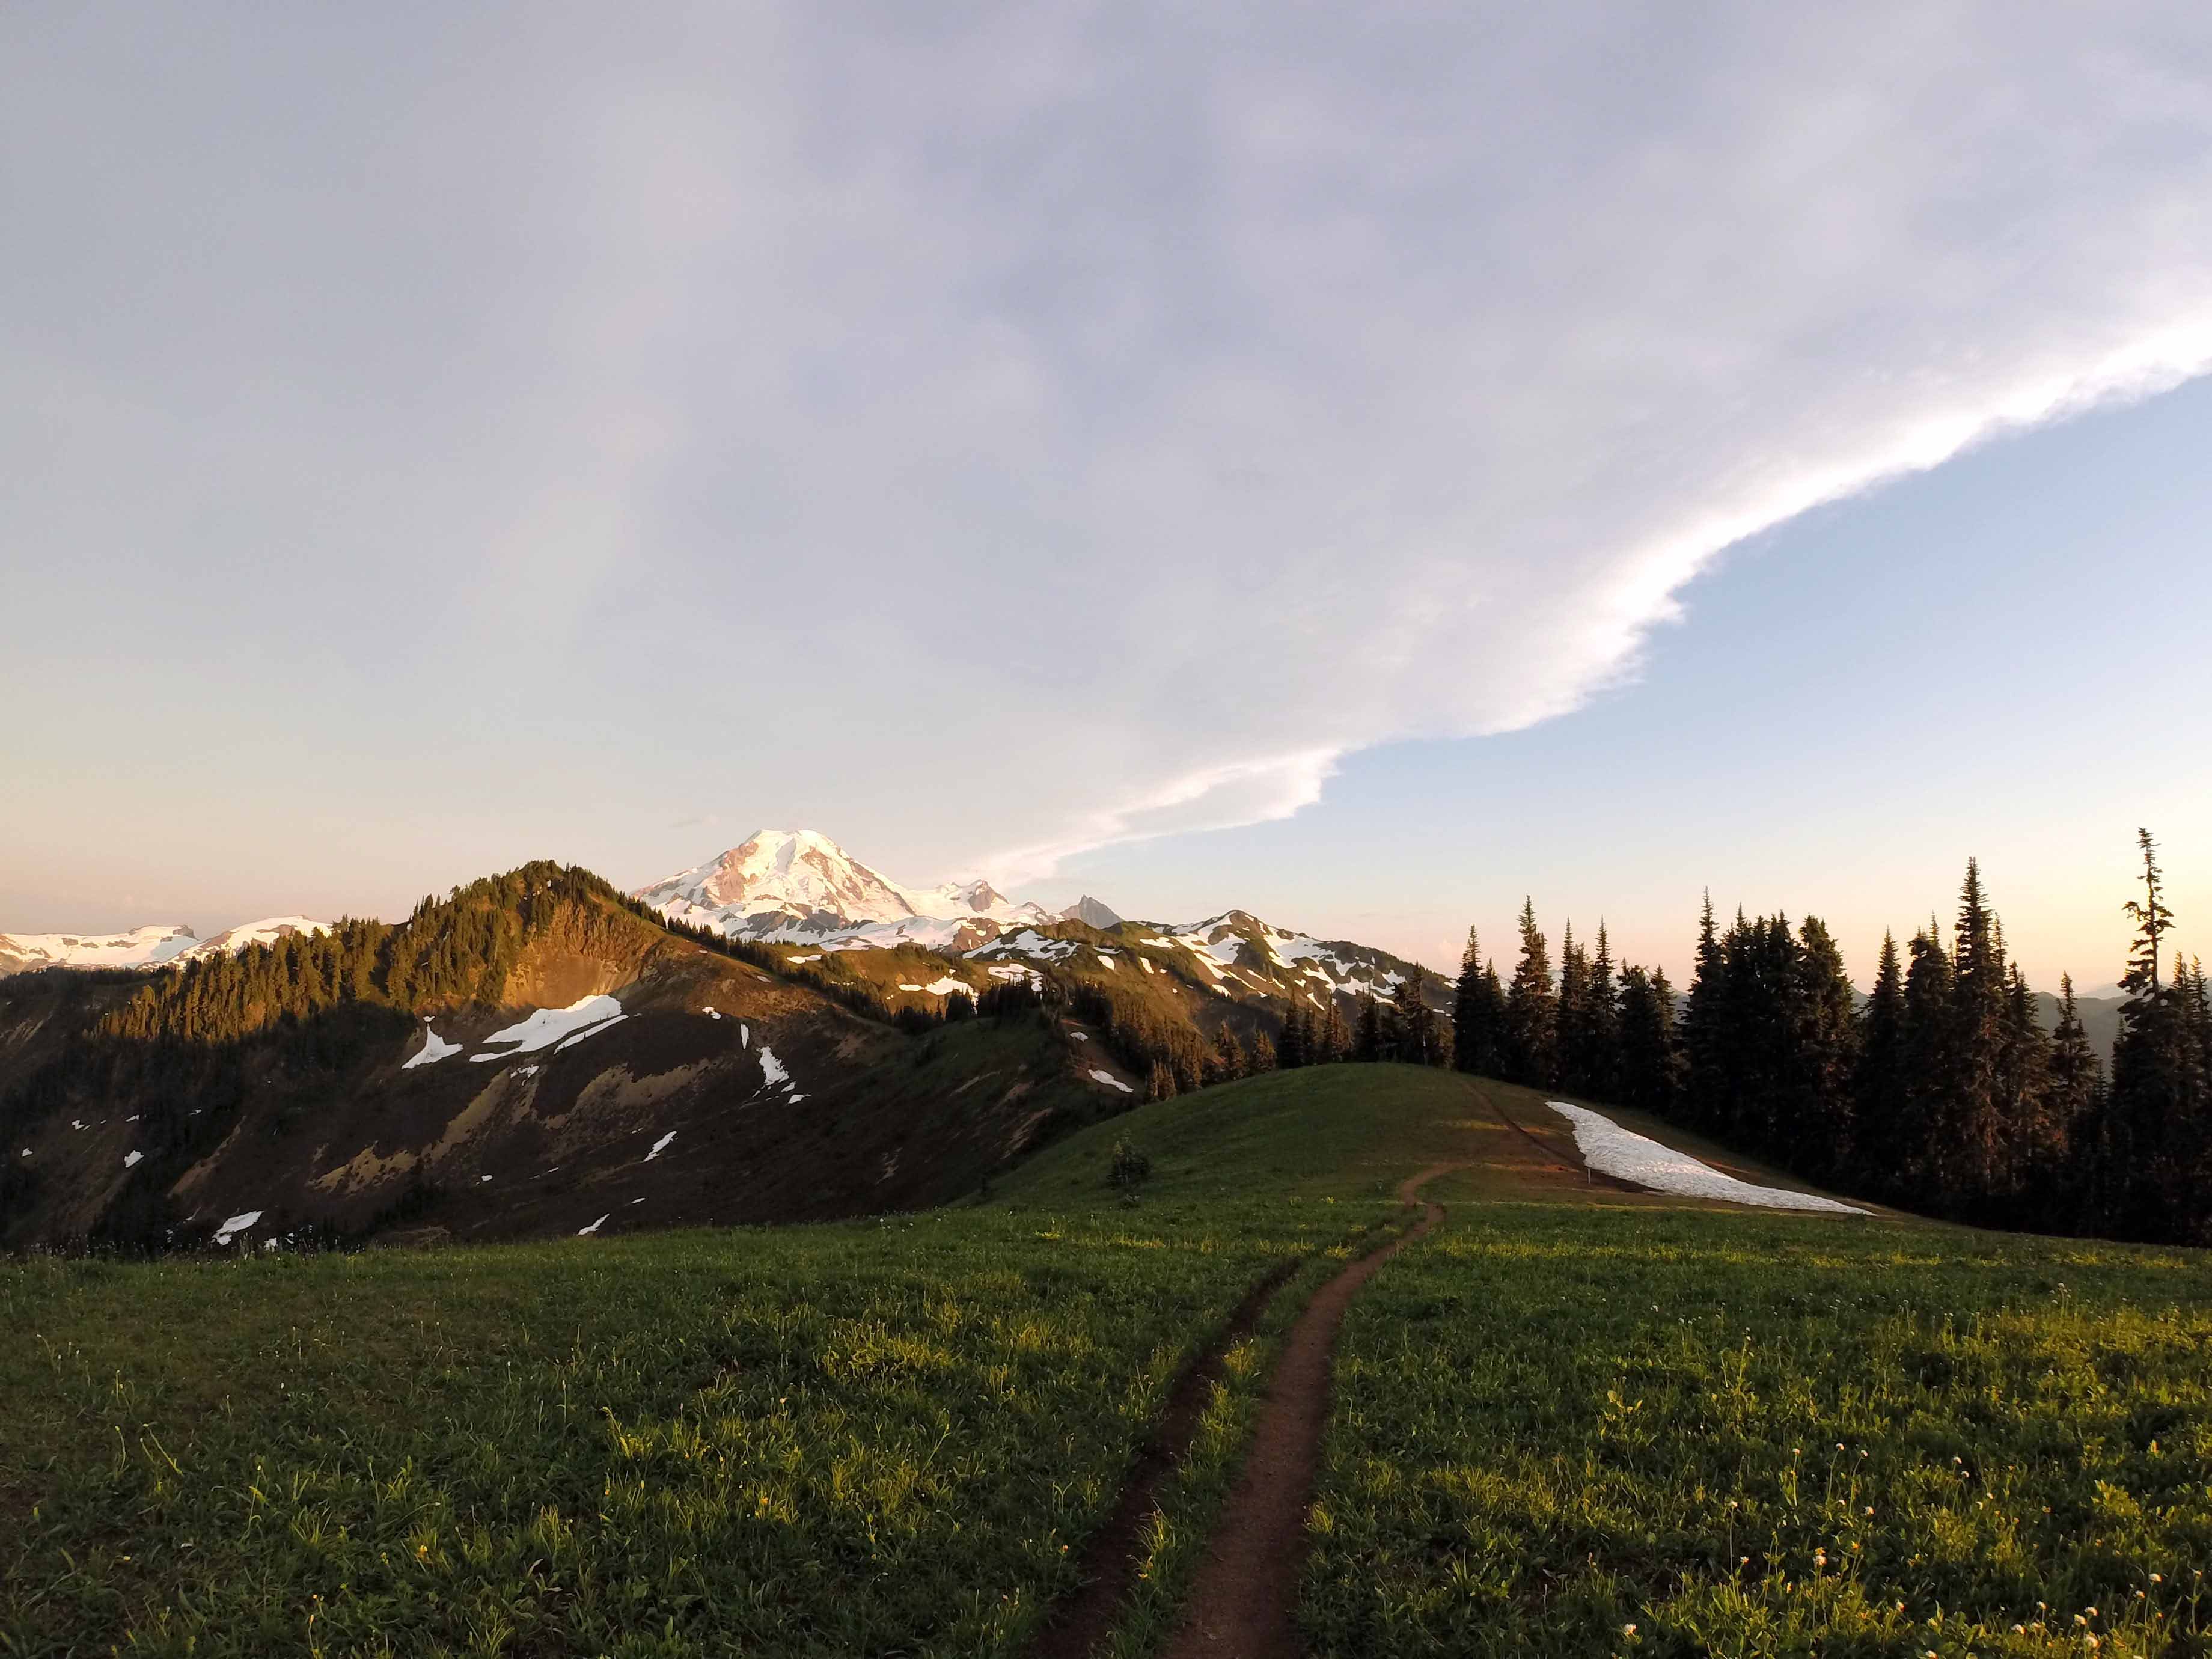 Skyline Divide has an abundance of alpine meadows, flowers and places to camp